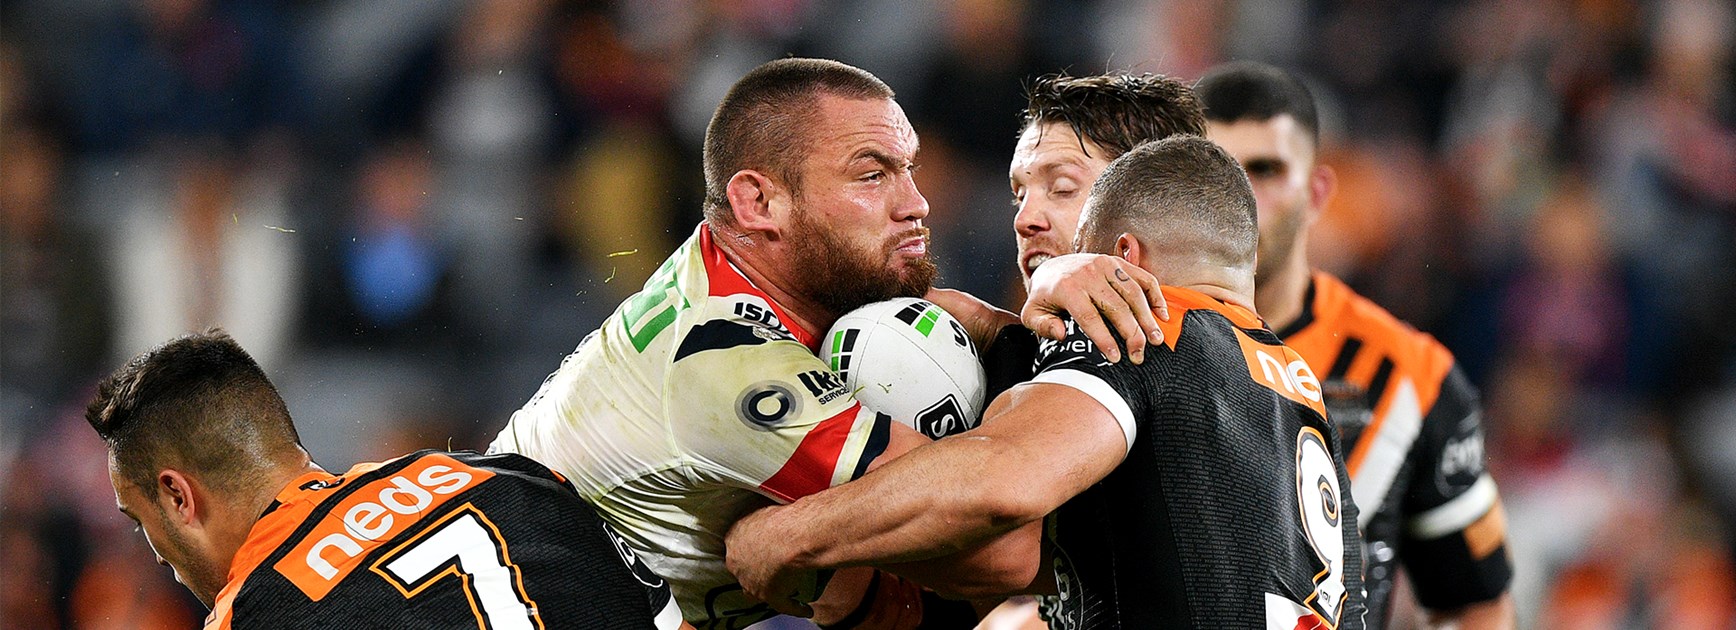 Match Preview | Wests Tigers v Roosters